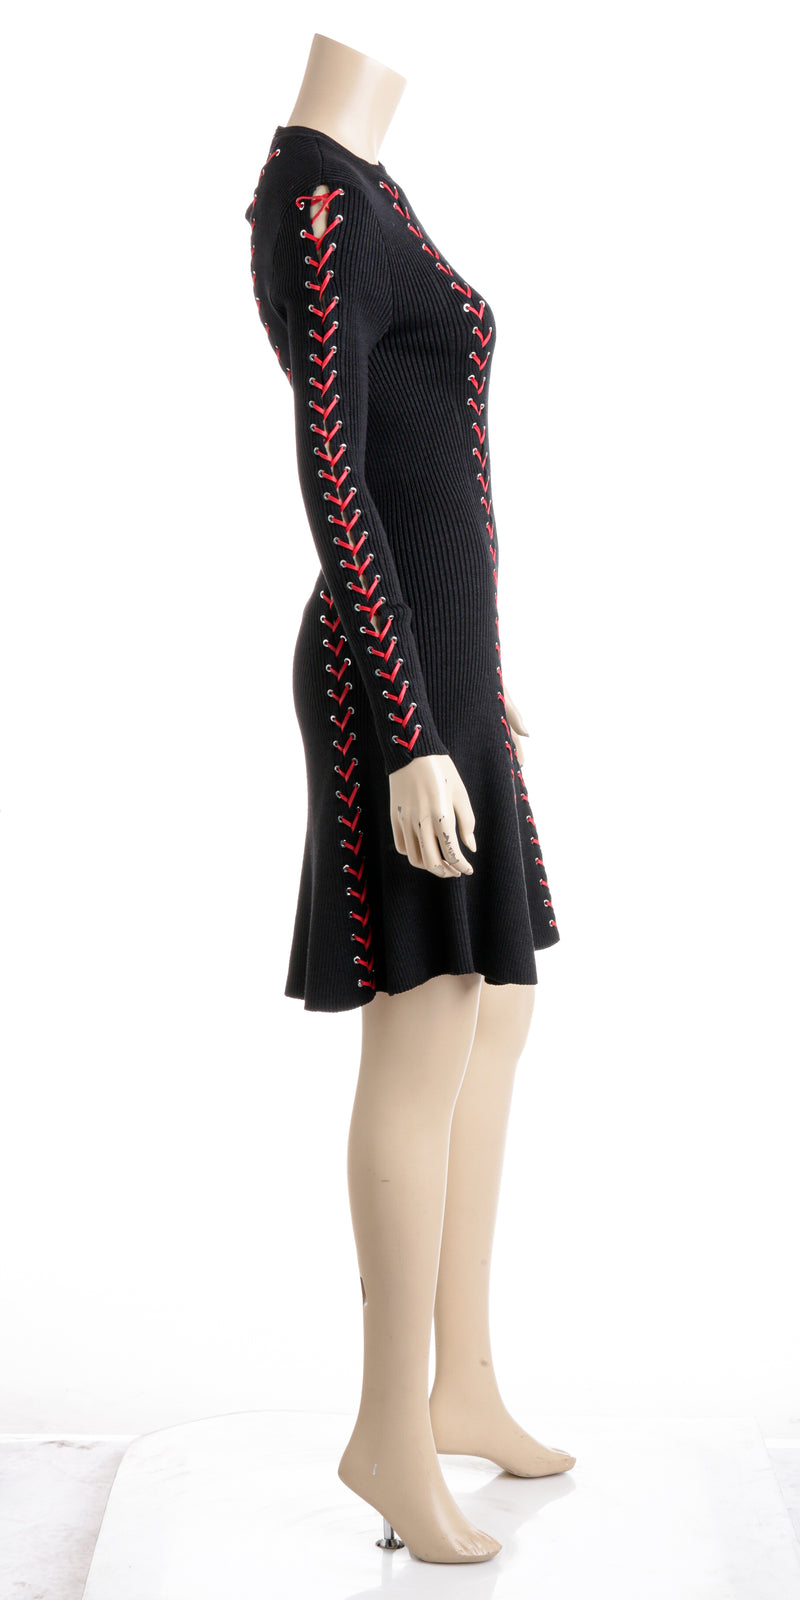 Alexander McQueen Black With Red Laced Stripes Flared Knitwear Dress Size Large